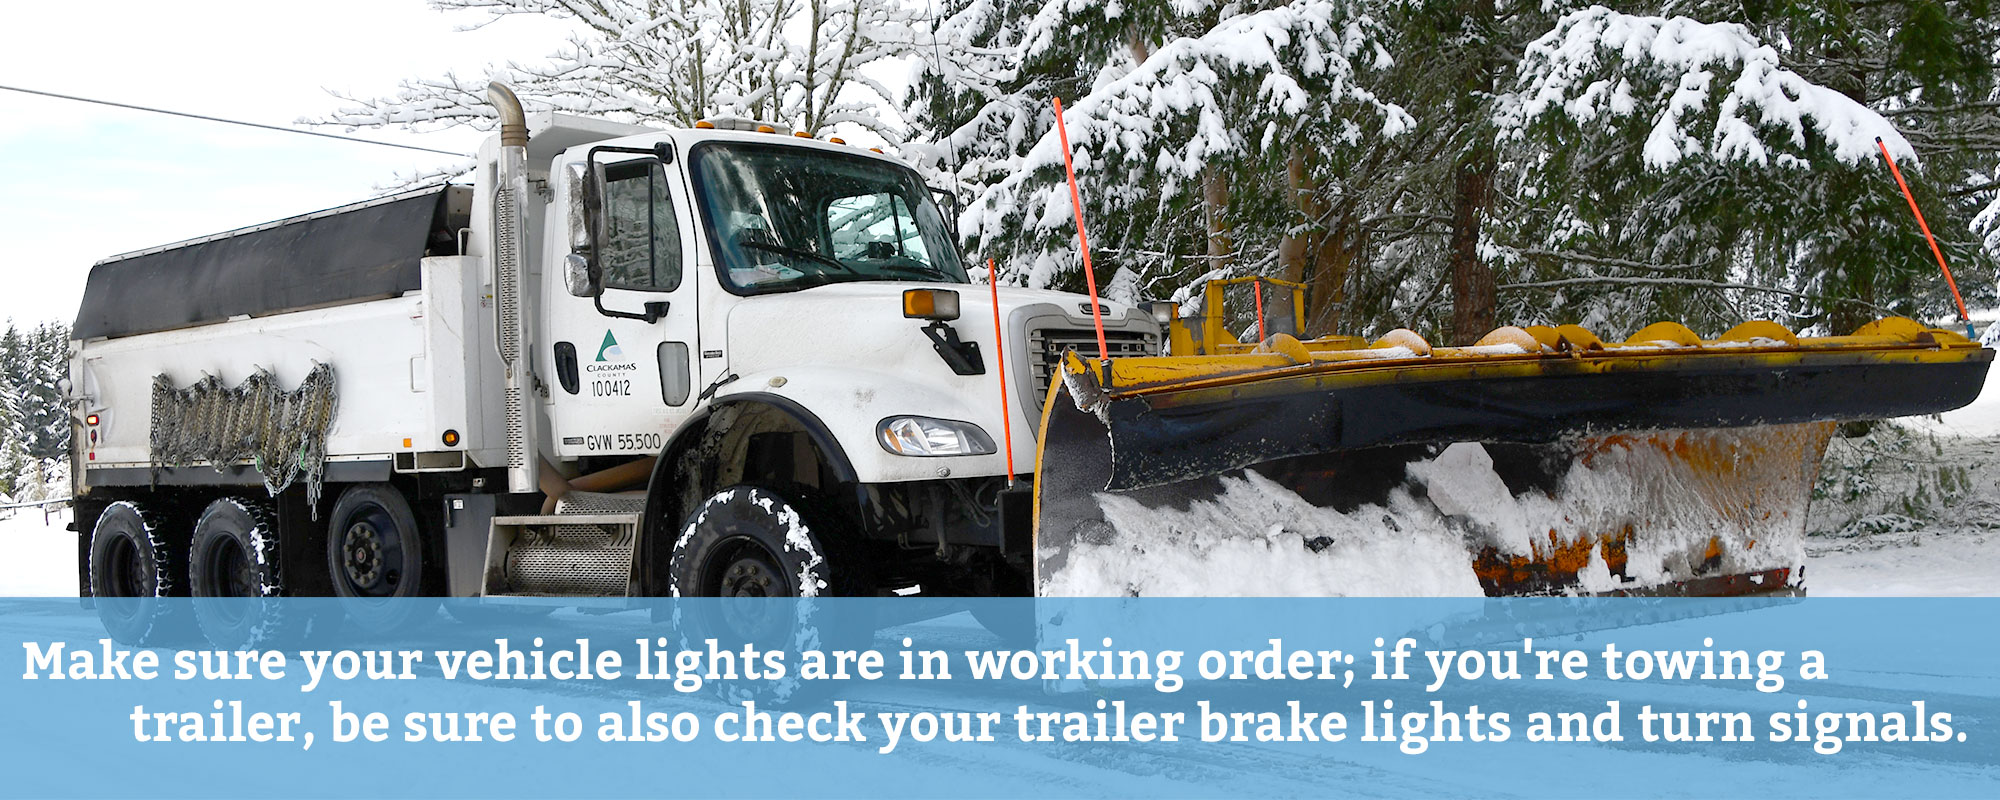 Make sure your vehicile lights are in working order; if you're towing a trailer, be sure to also check your trailer brake lights and turn signals.